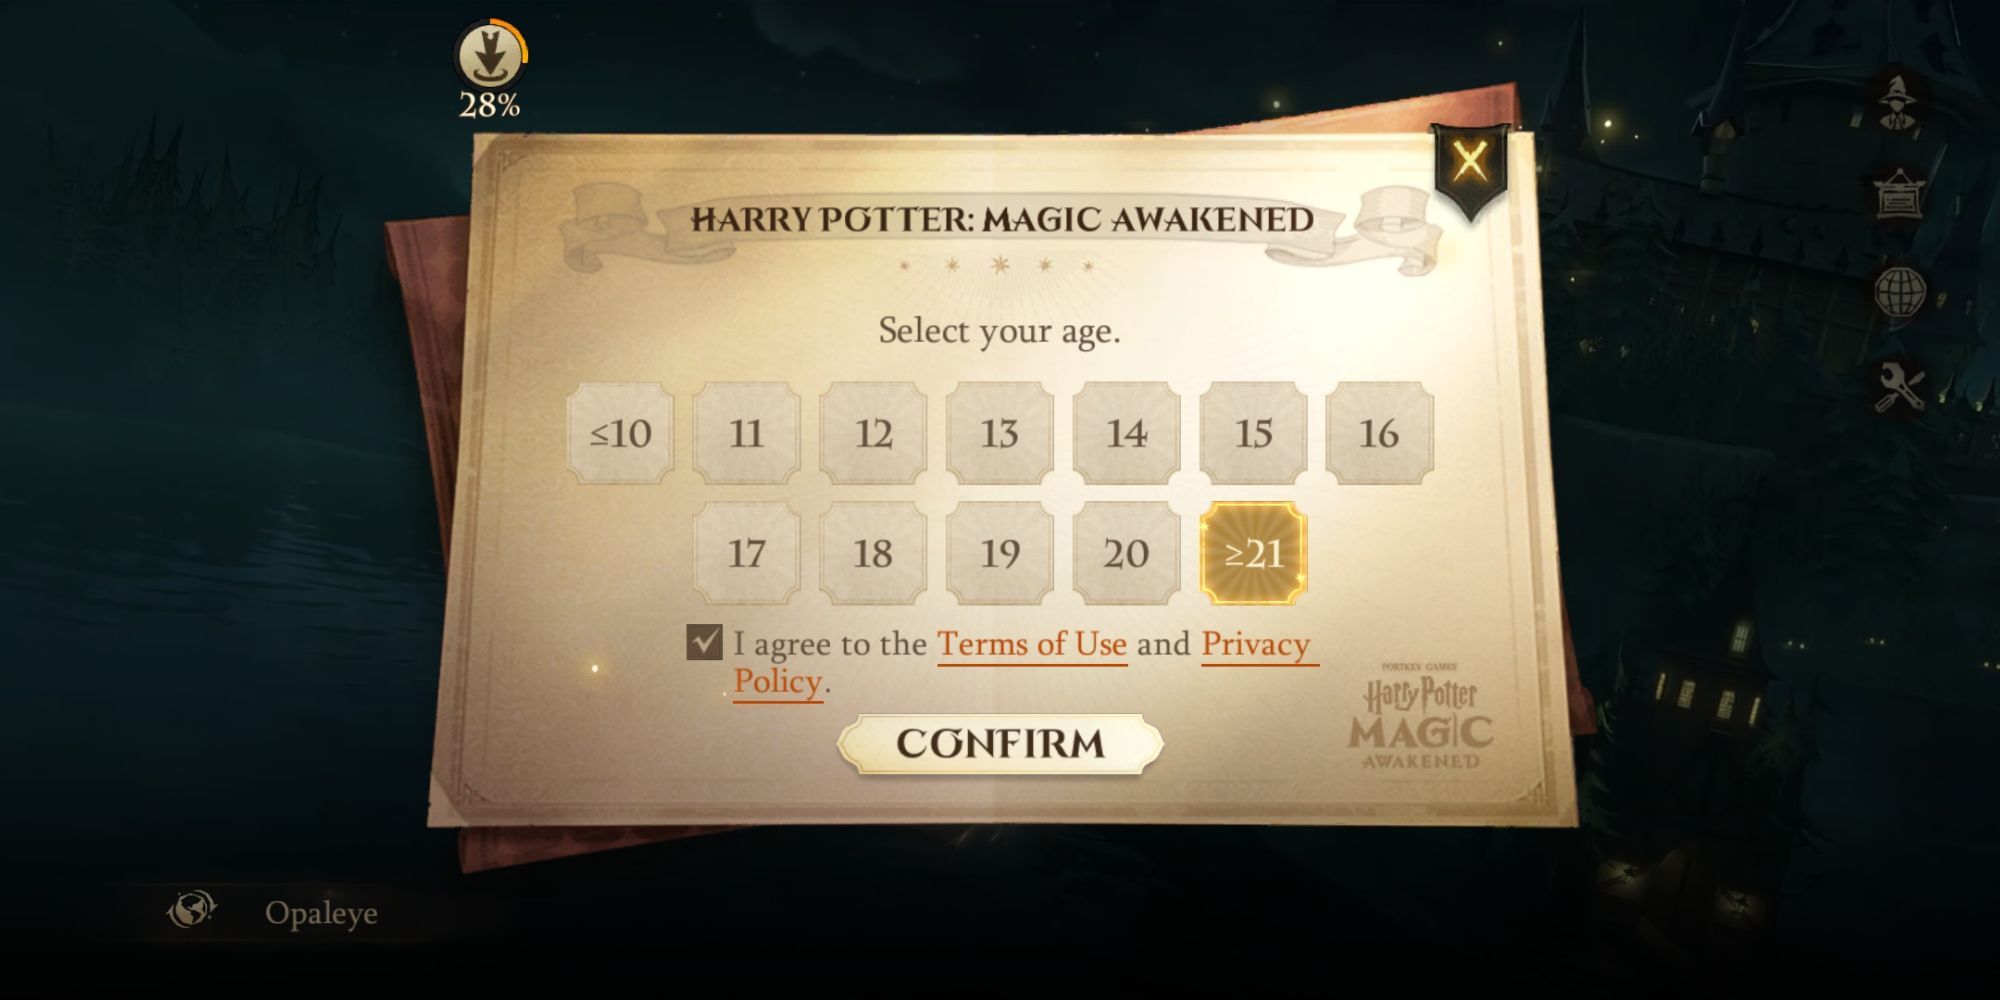 Harry Potter: Magic Awakened Select Your Age Page